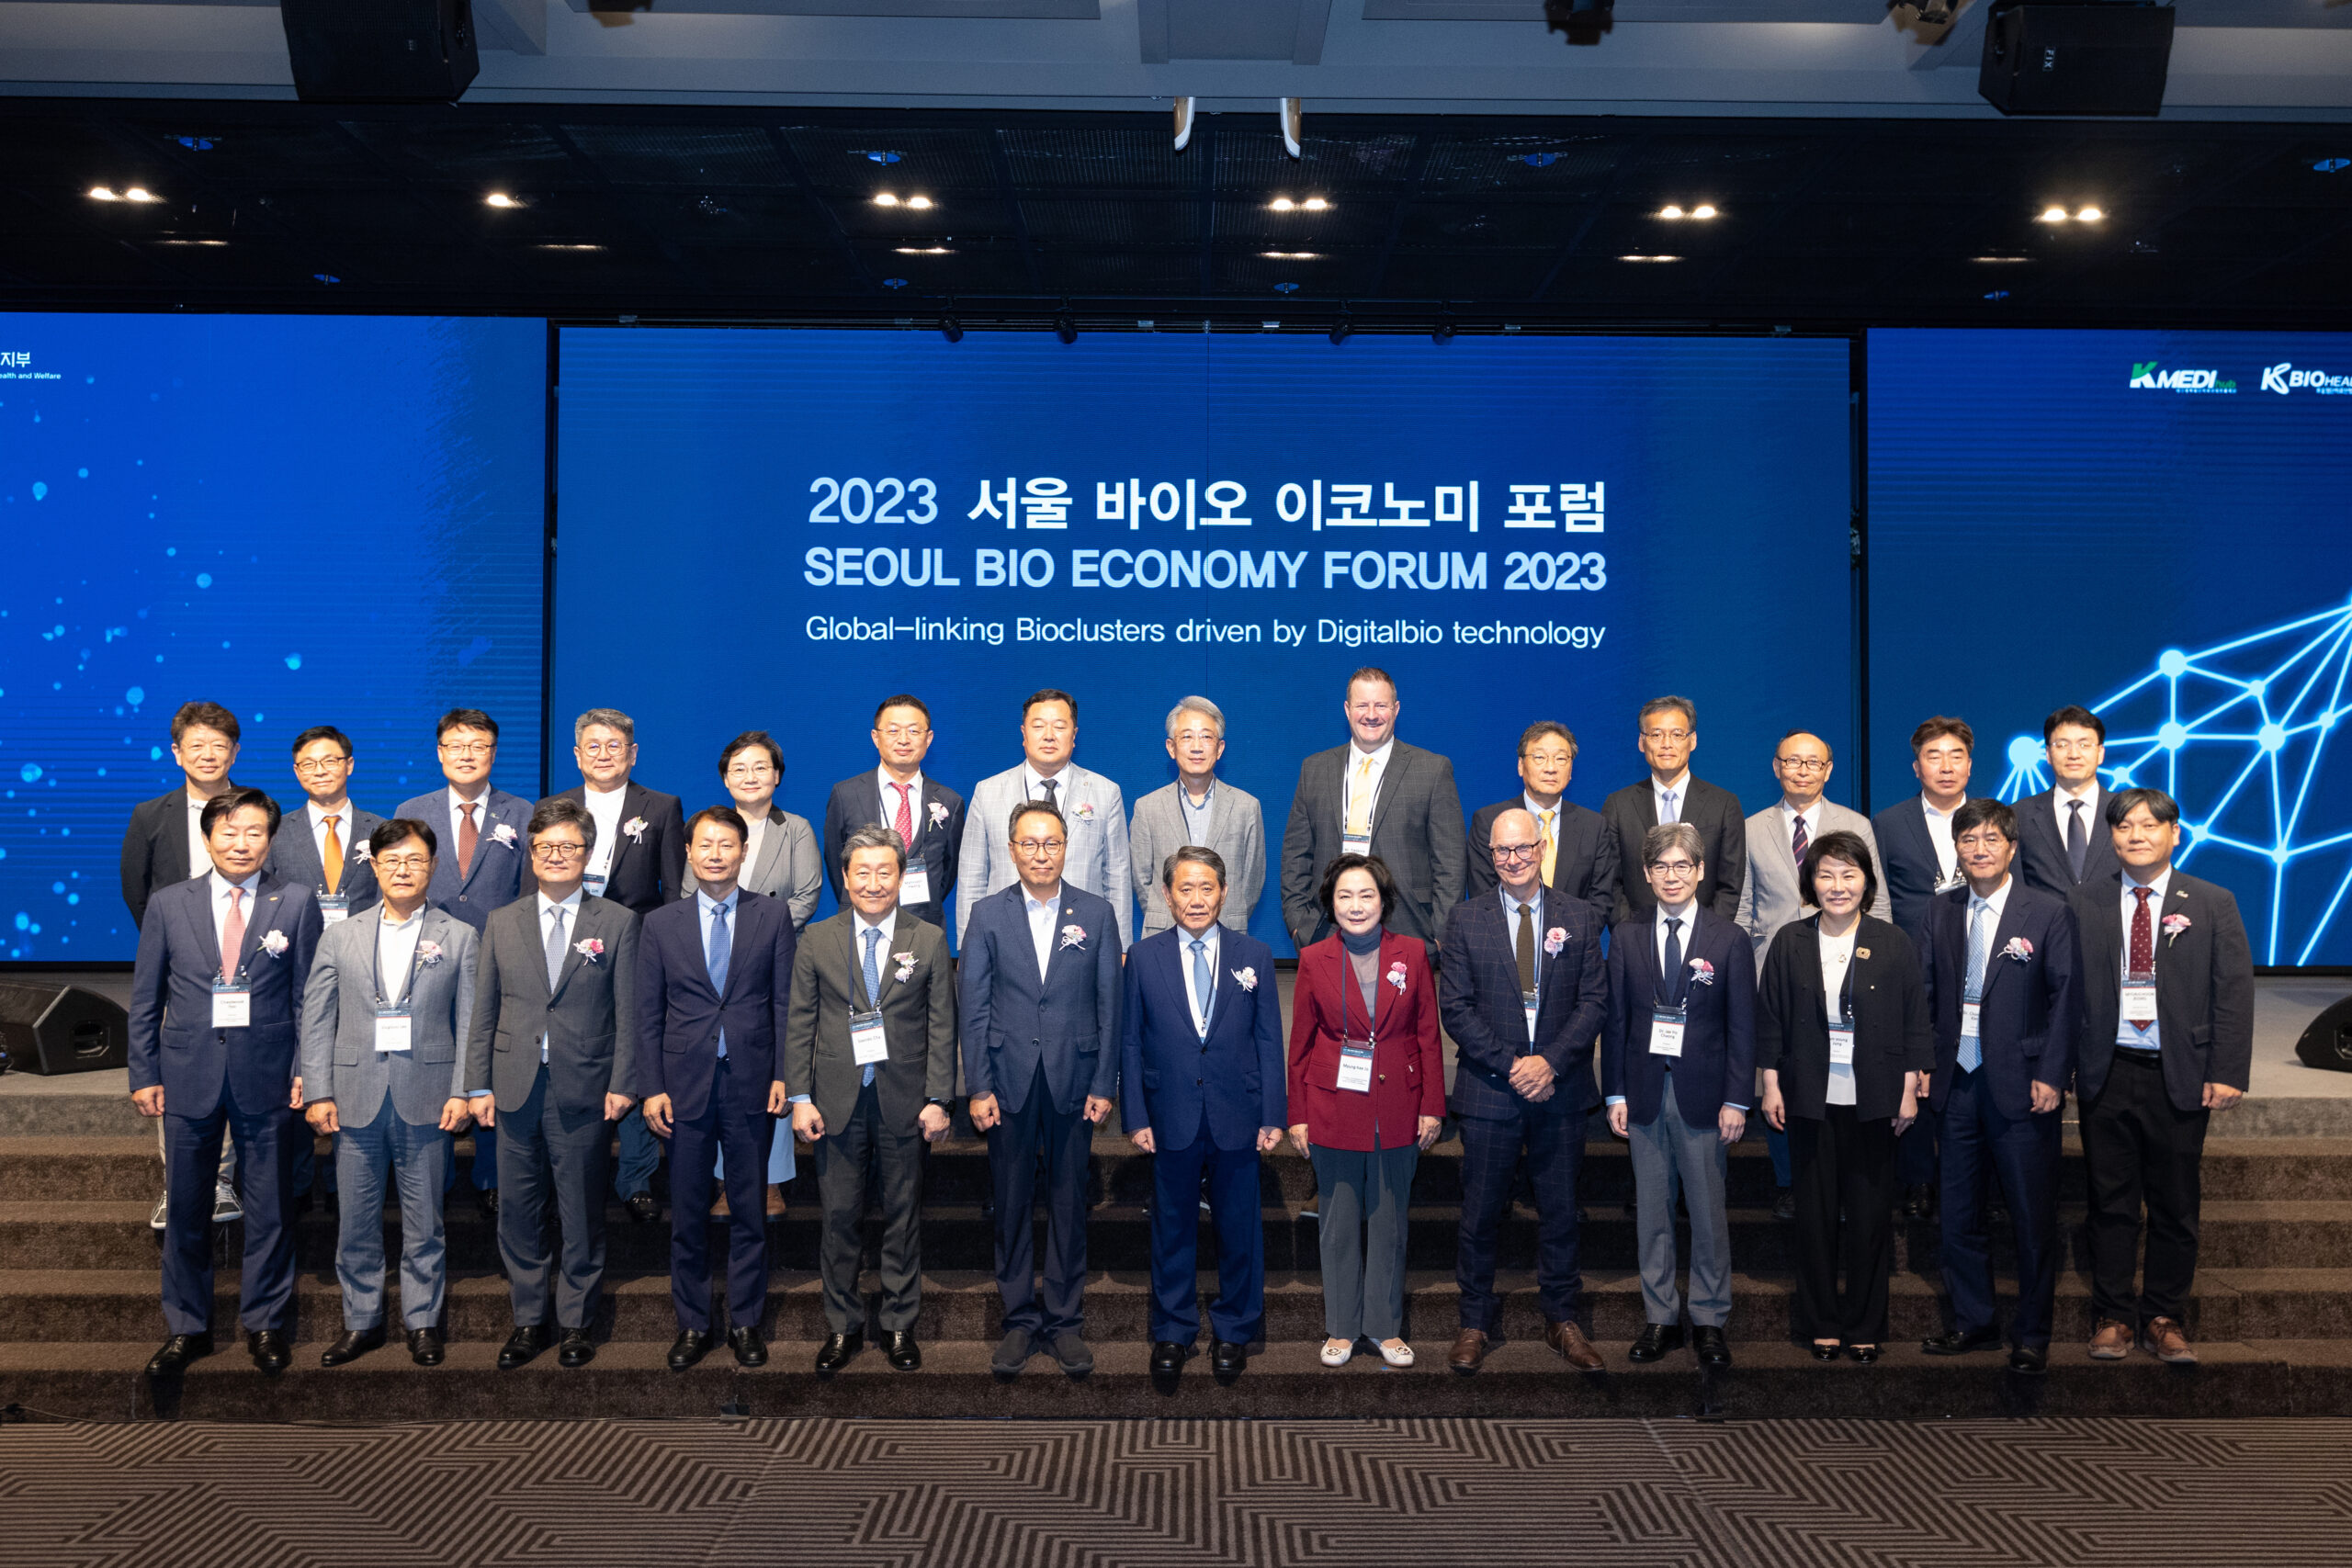 Seoul Bio Economy Forum 2023: The importance of connecting locally and globally